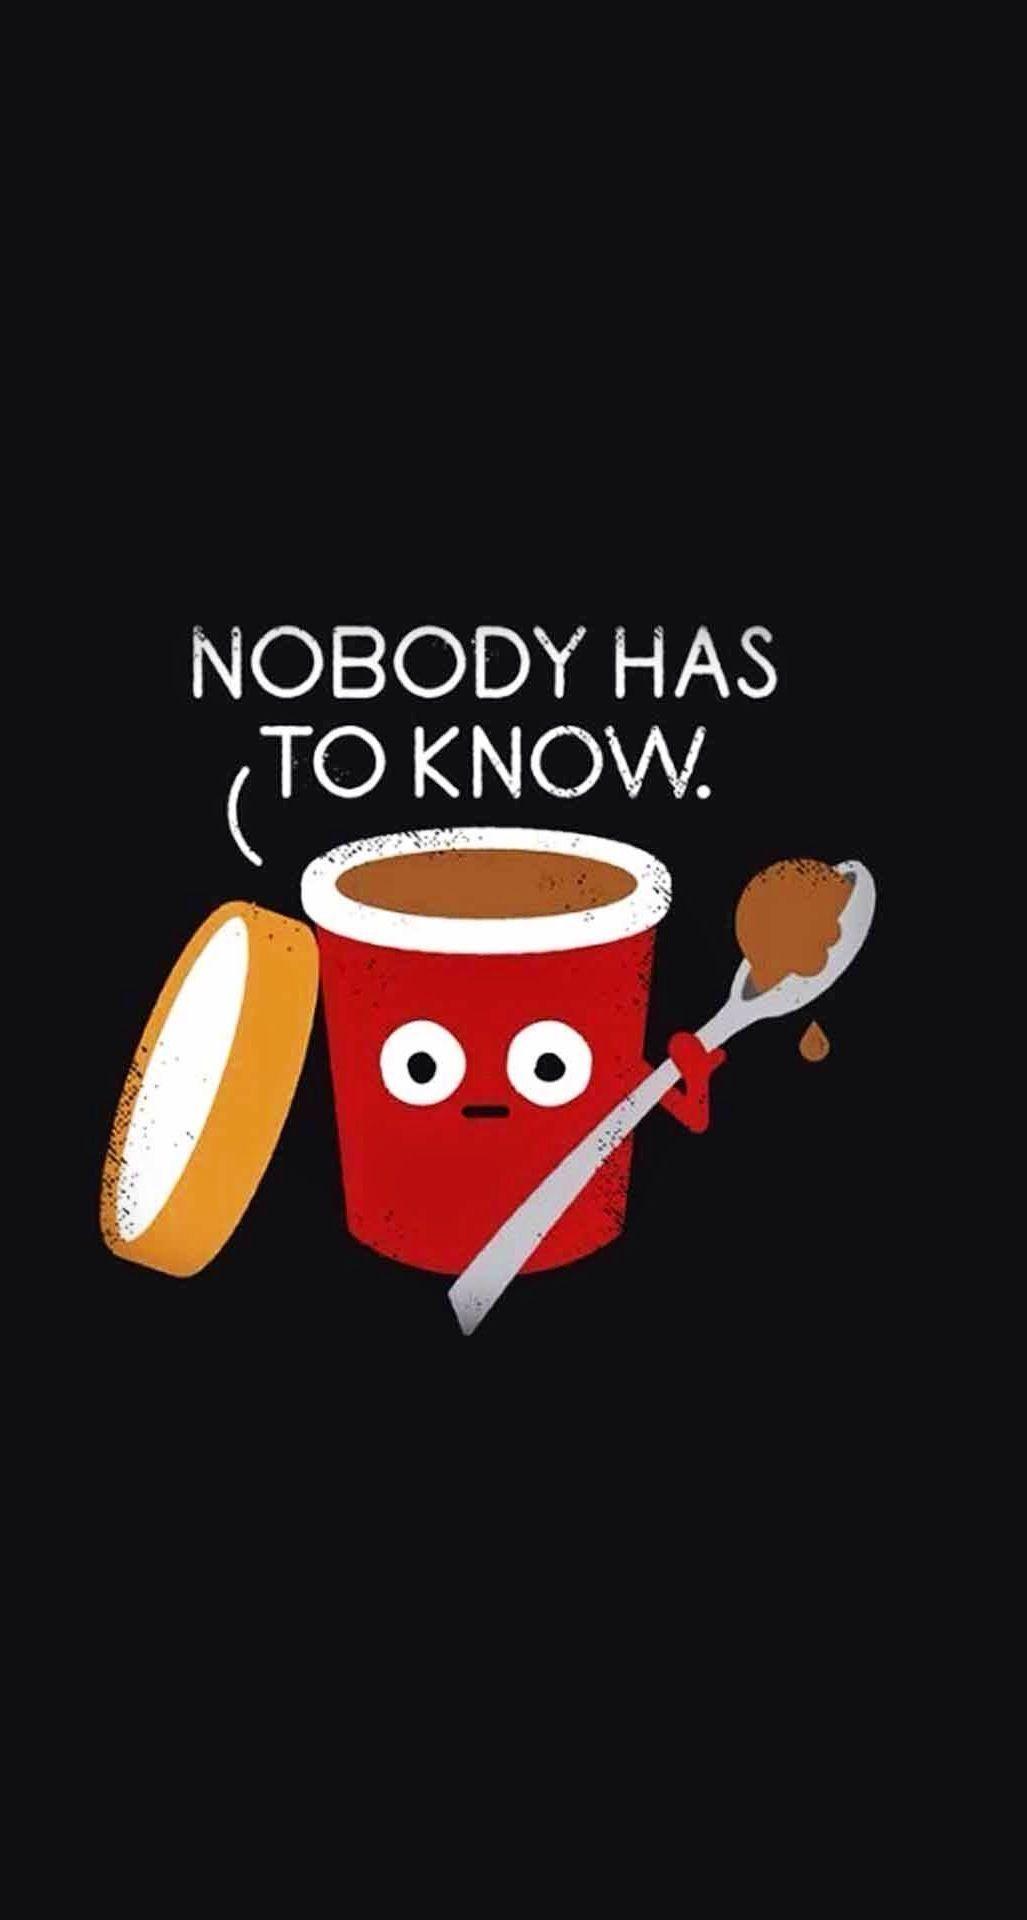 iPhone Wallpaper Food Inspirational No Body Has to Know Funny